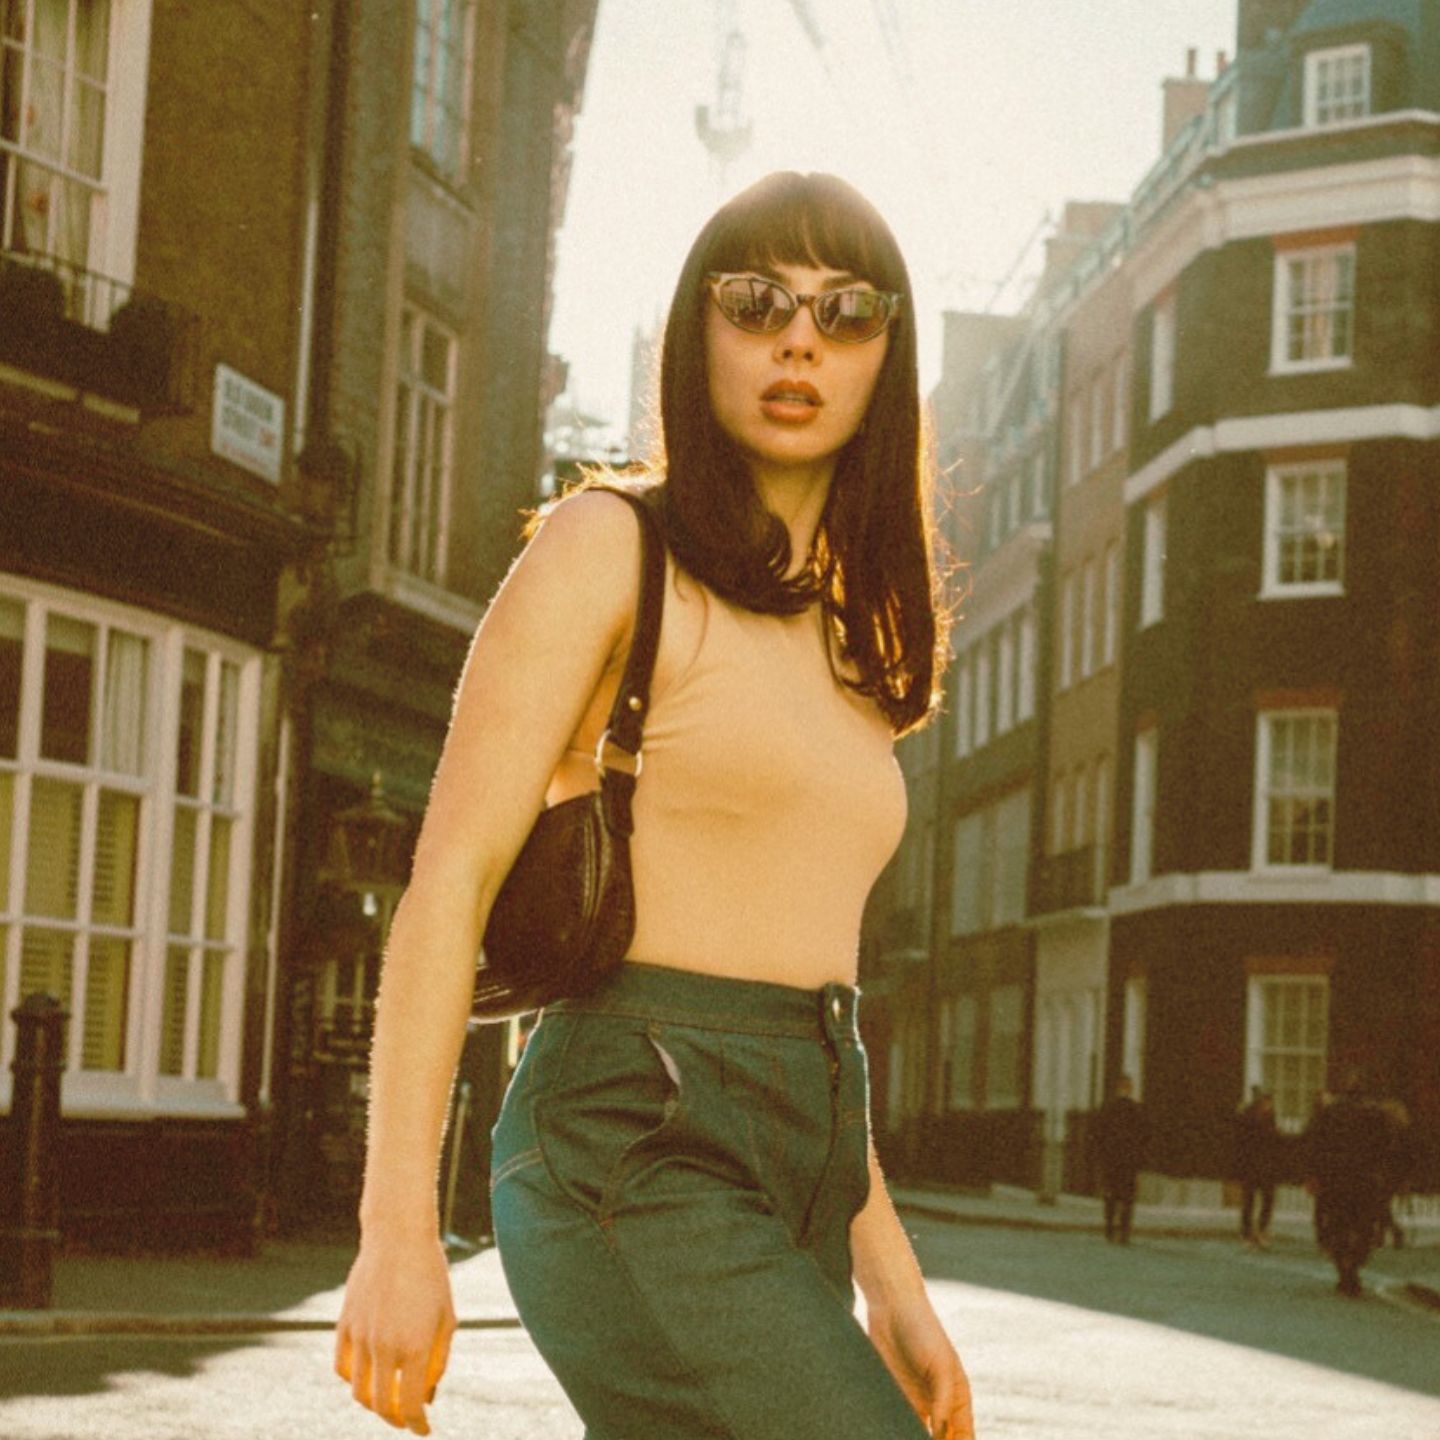 Woman in sunglasses with small purse walking on the streets of London with brick buildings behind her